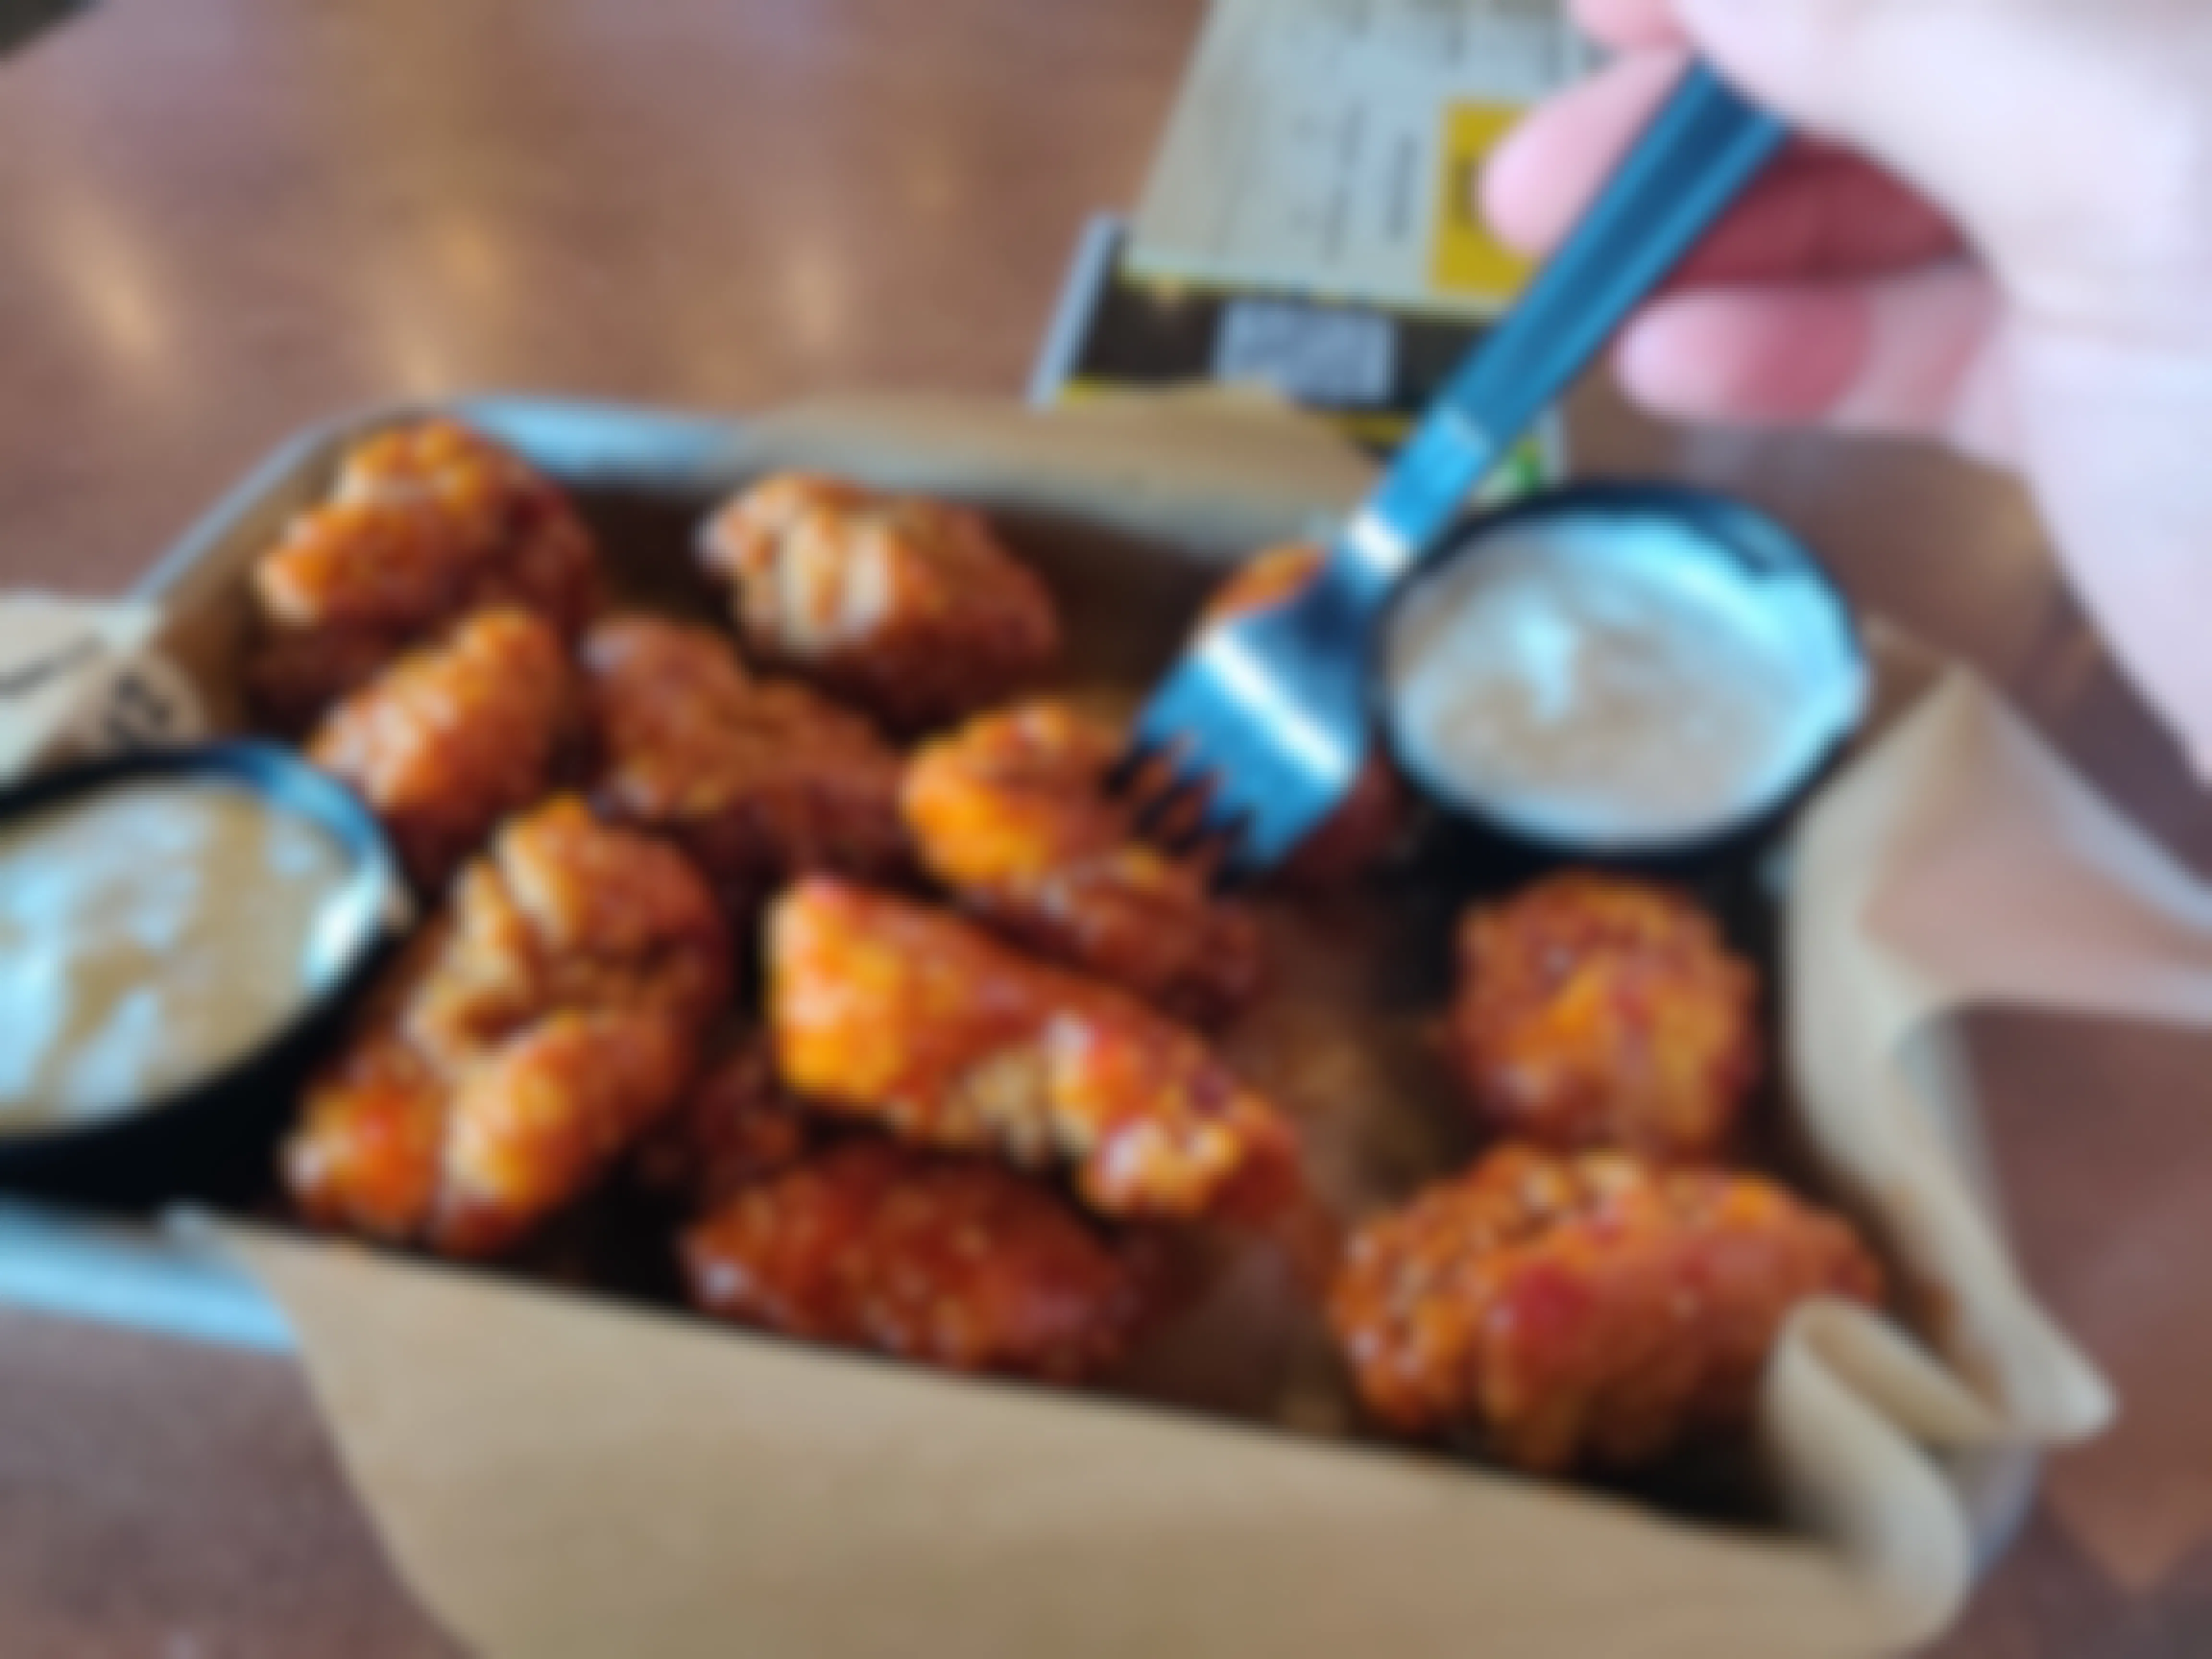 A person using a fork to pick up a boneless wing out of a platter of boneless wings and two dip cups.